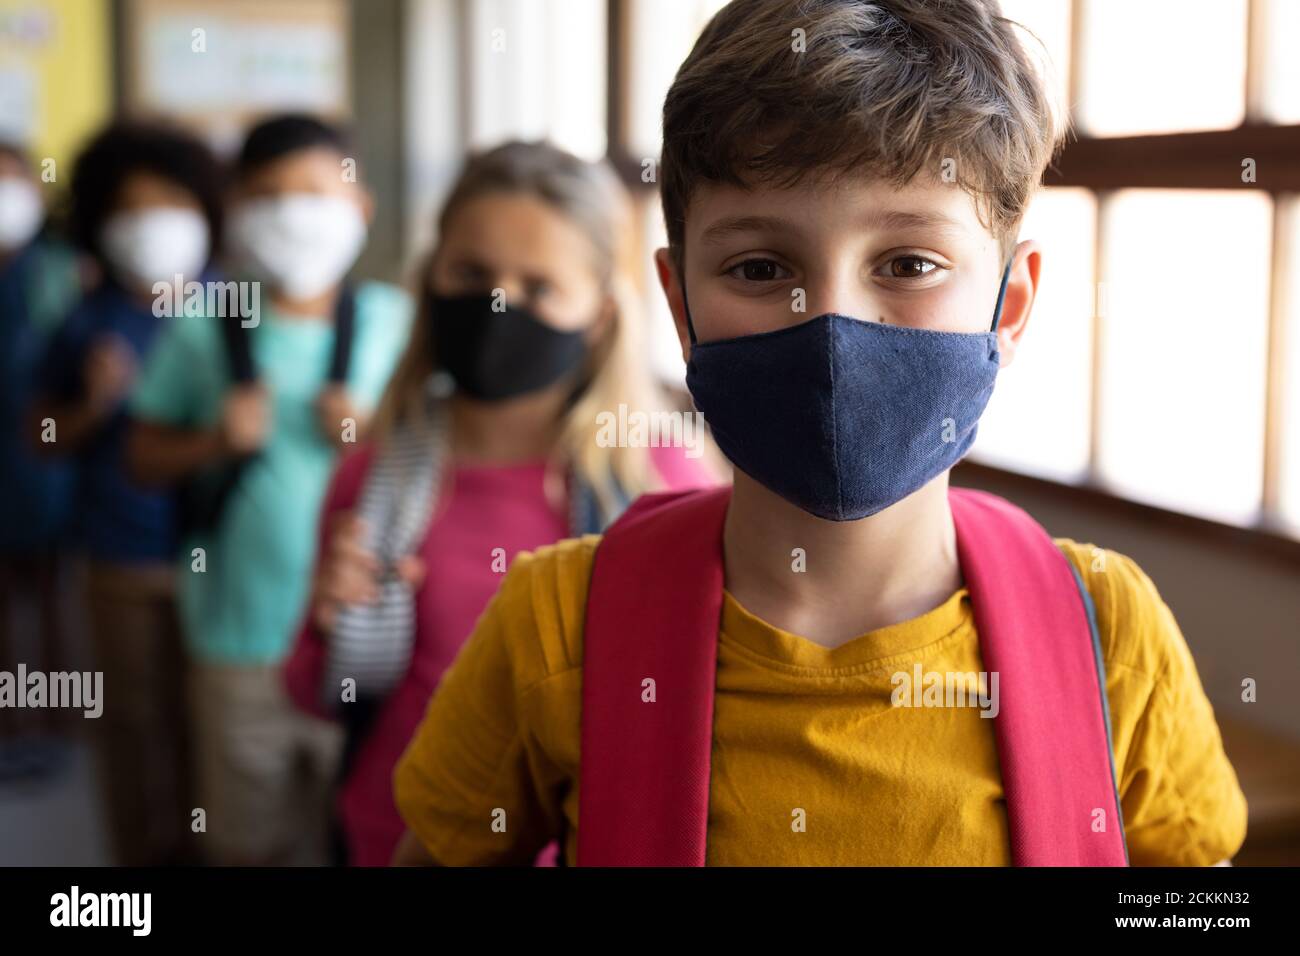 Group of kids wearing face masks with bag packs standing in a queue at school Stock Photo